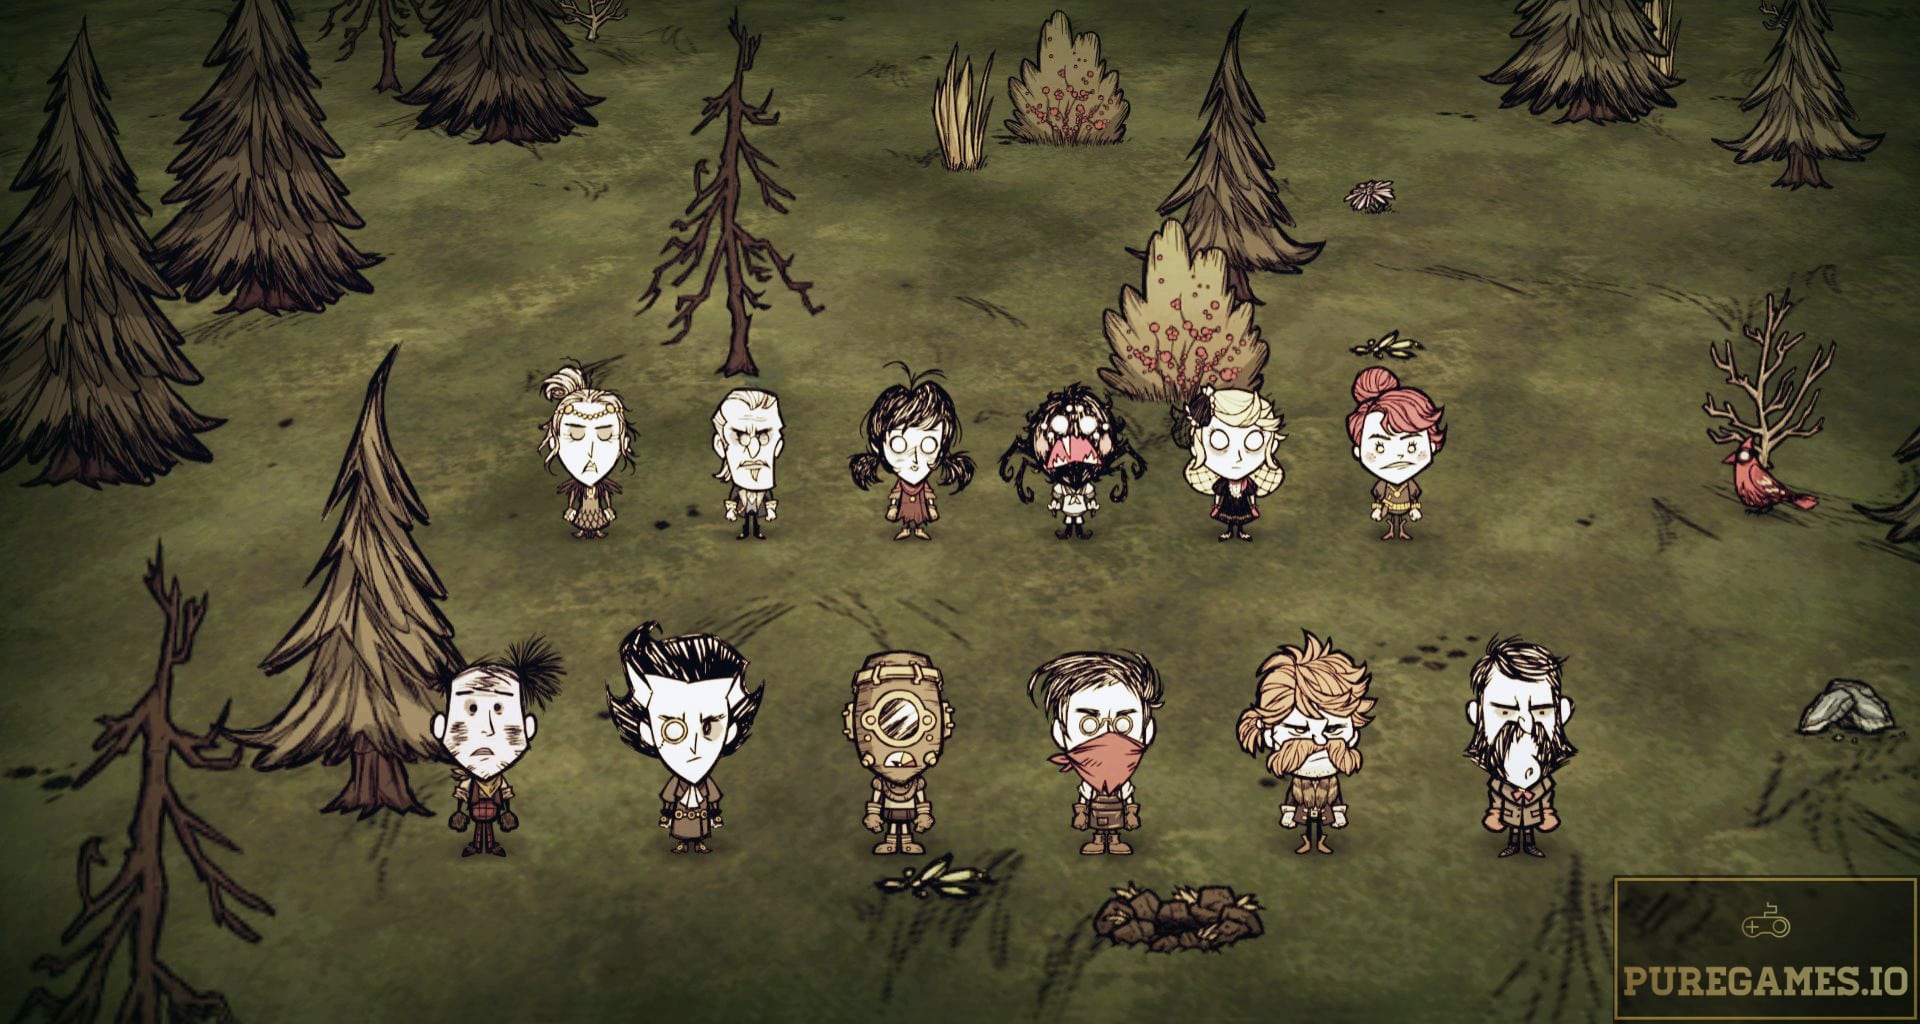 Don’t Starve Together Review Puregames